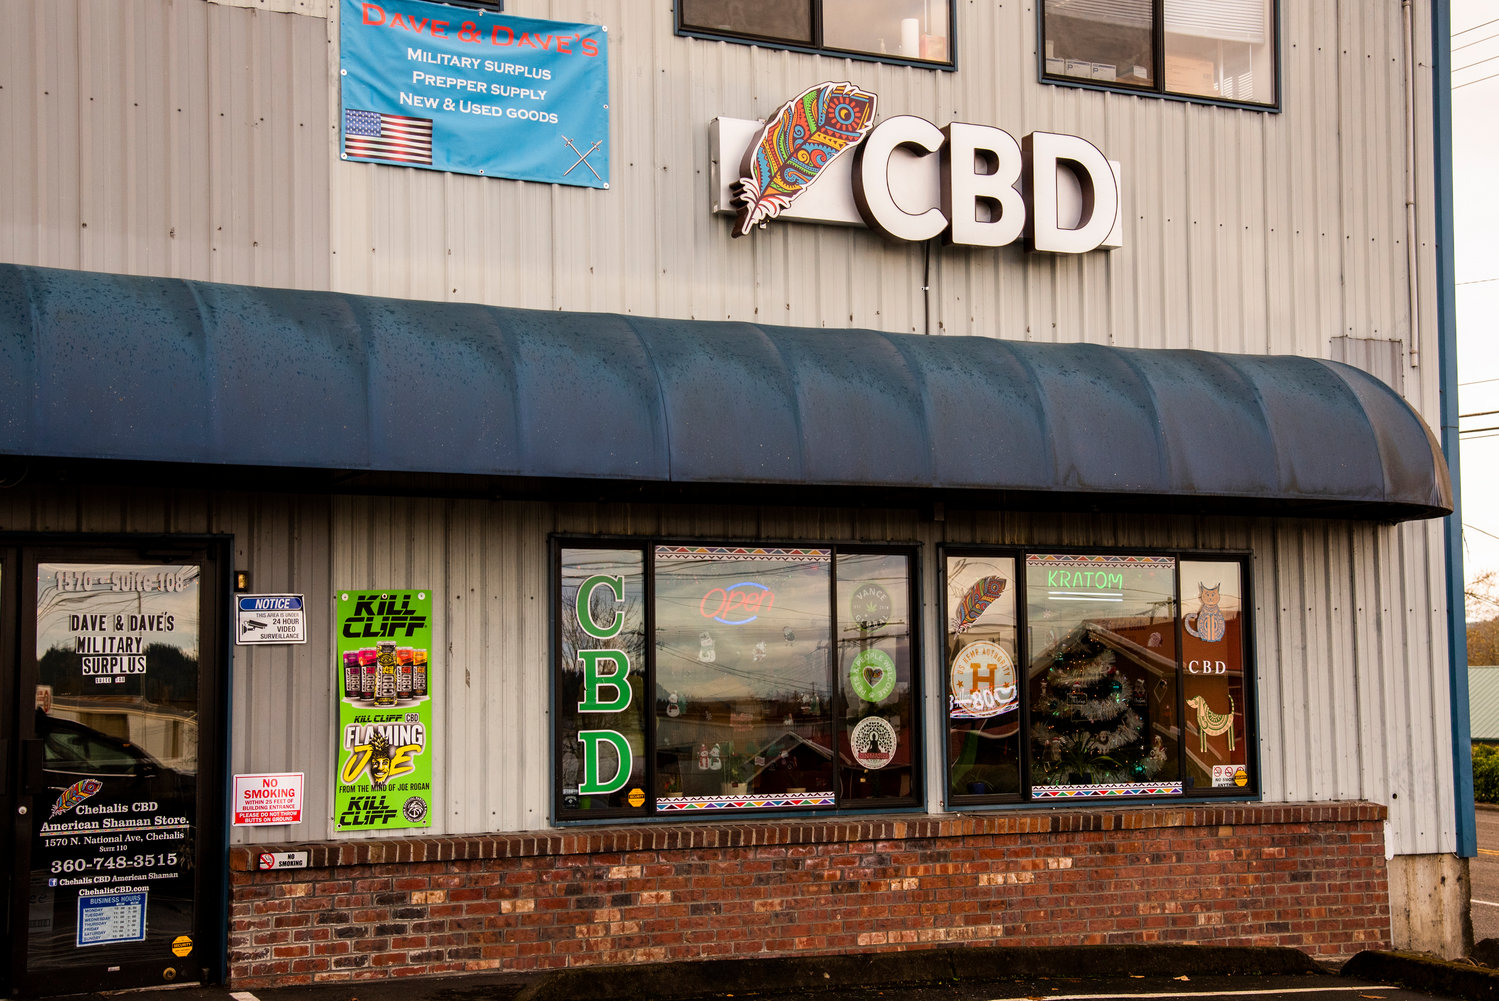 Chehalis CBD American Shaman is located at 1570 North National Avenue Suite 110 in Chehalis.